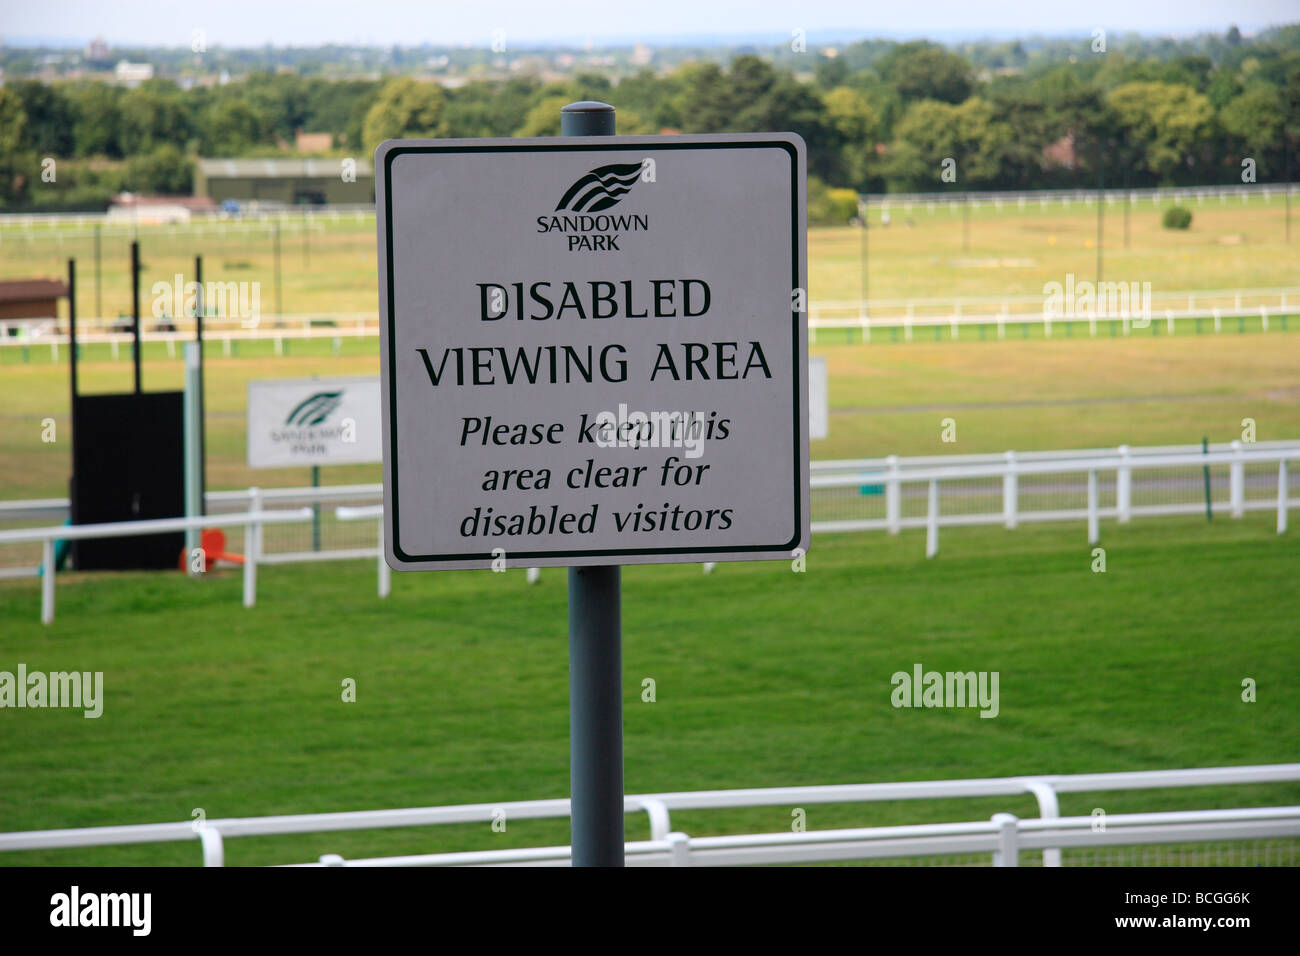 Sign indicating the Disabled Viewing Area at Sandown Park Esher Surrey Stock Photo